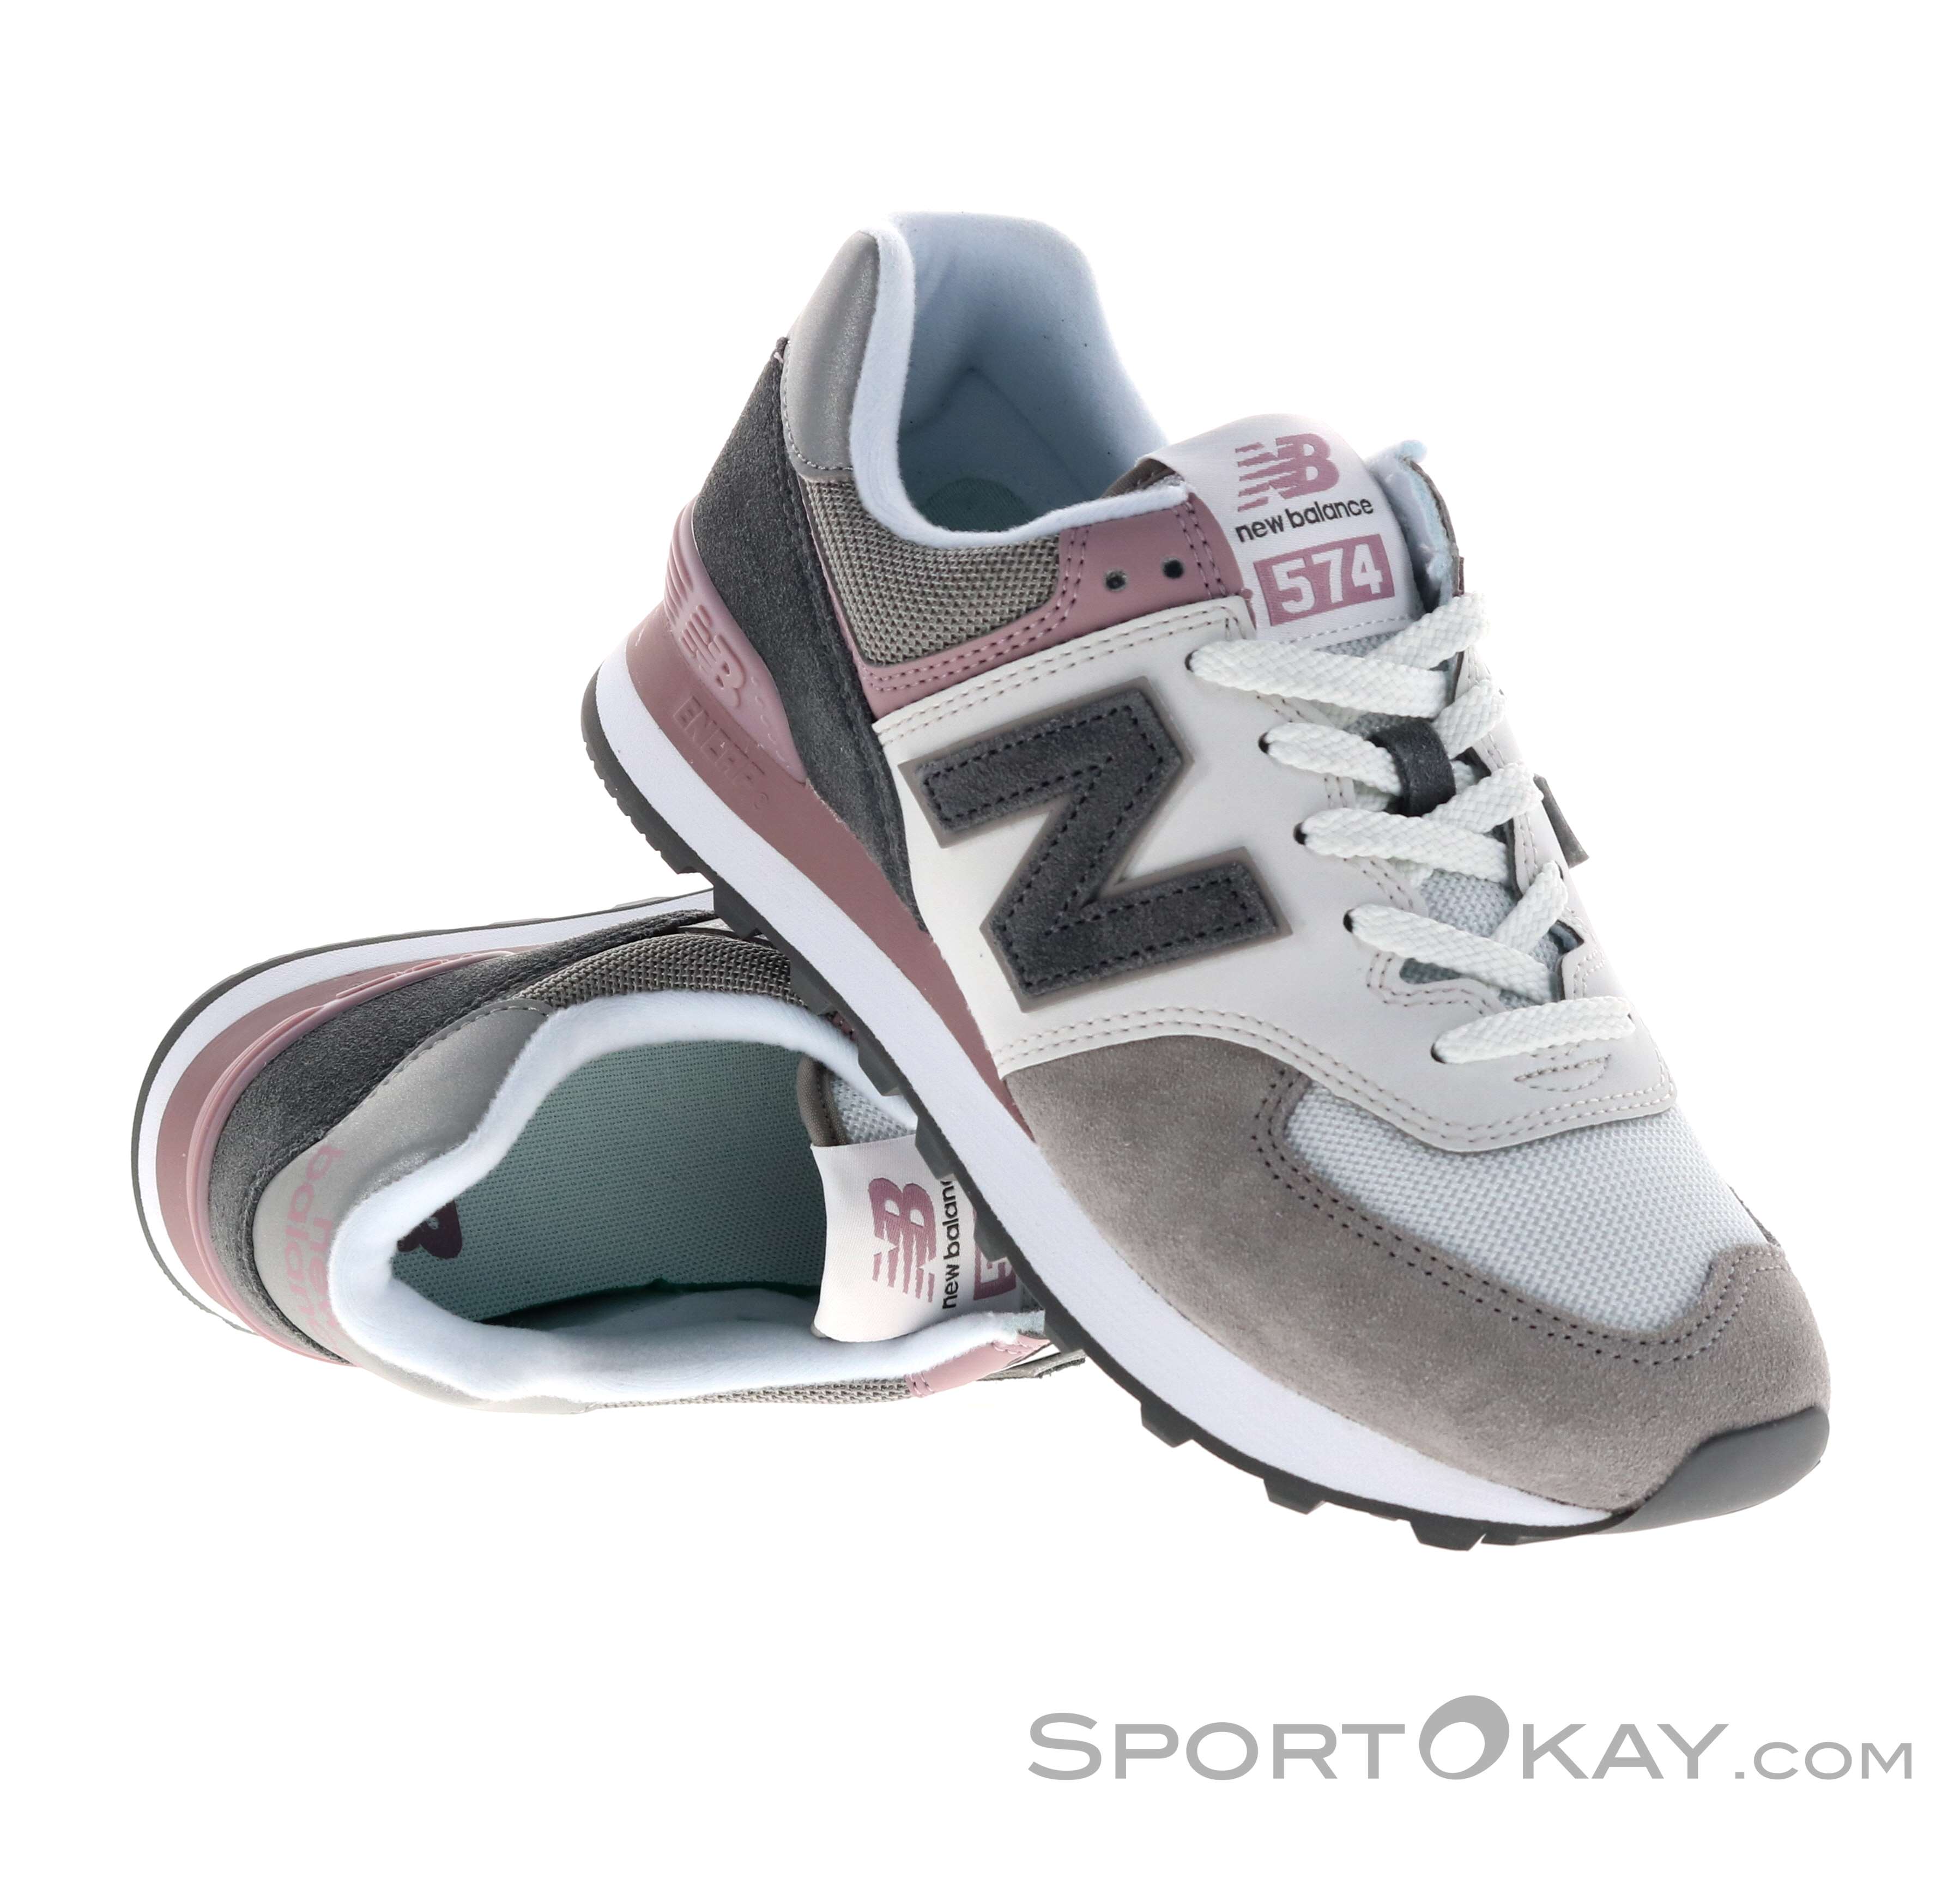 Balance 574 Womens Leisure Shoes - Shoes - Shoes & Poles - Outdoor - All